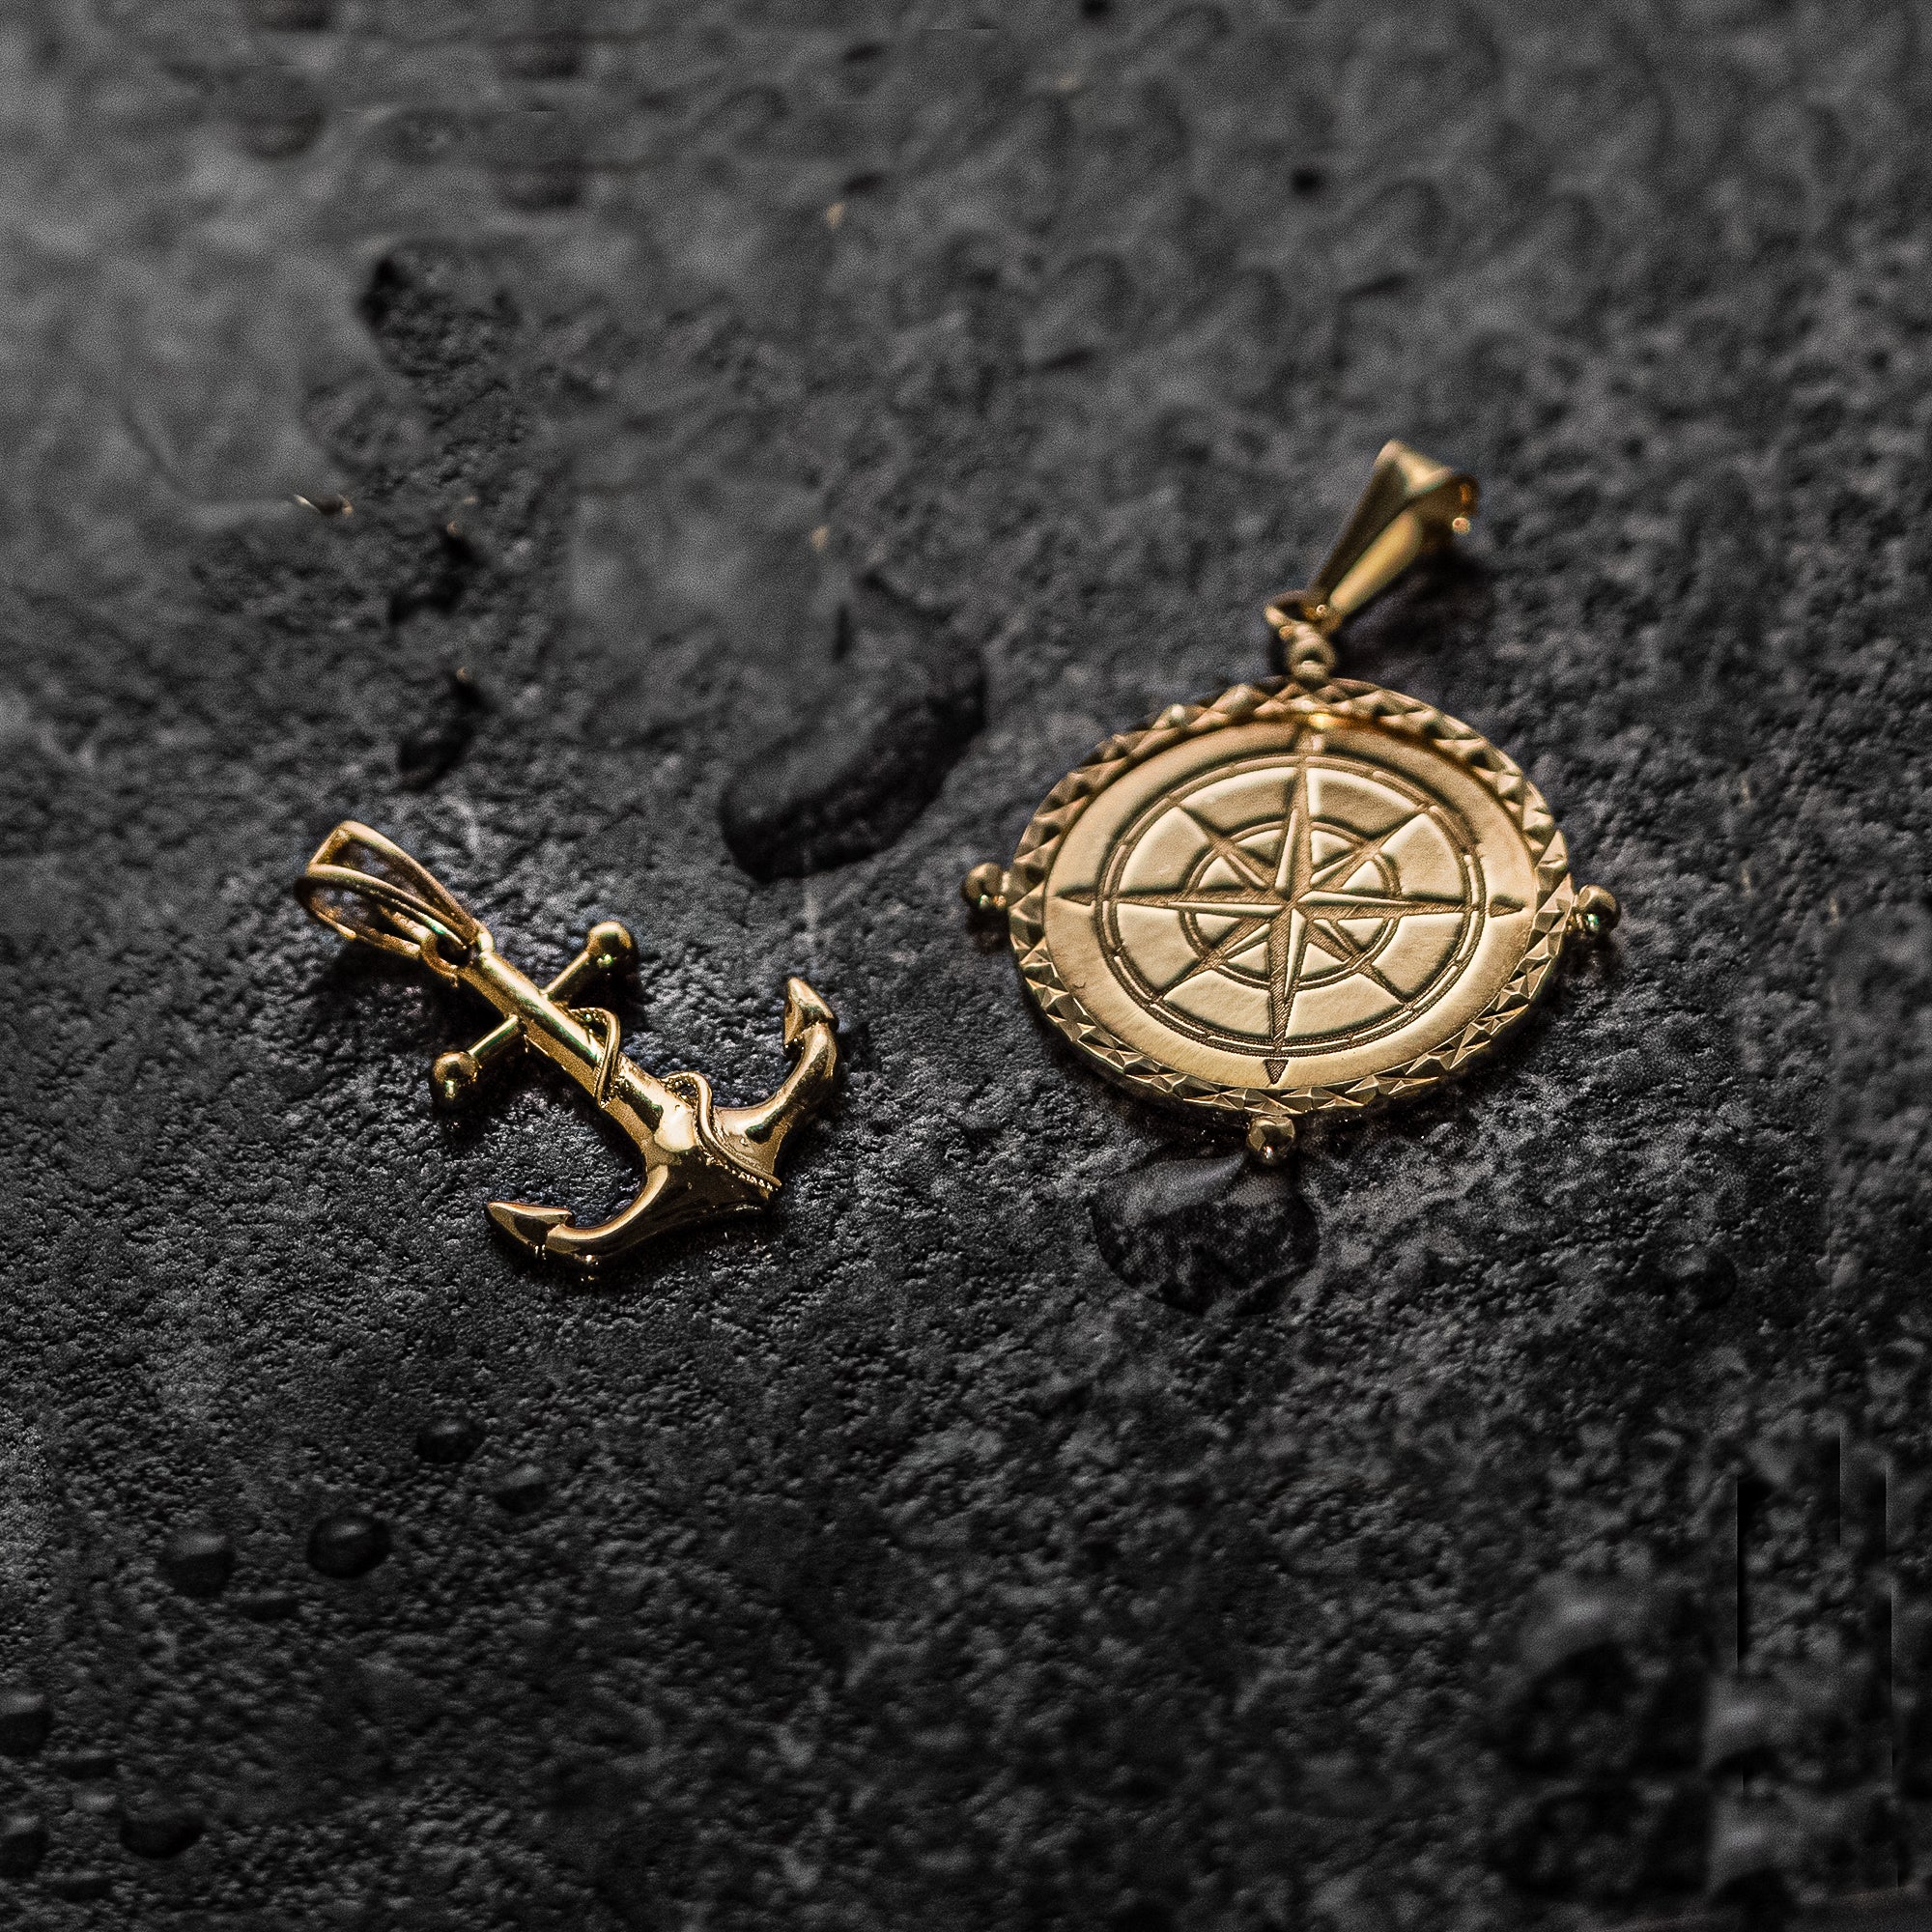 Do Religious Pendants Save You From Negative Energies?